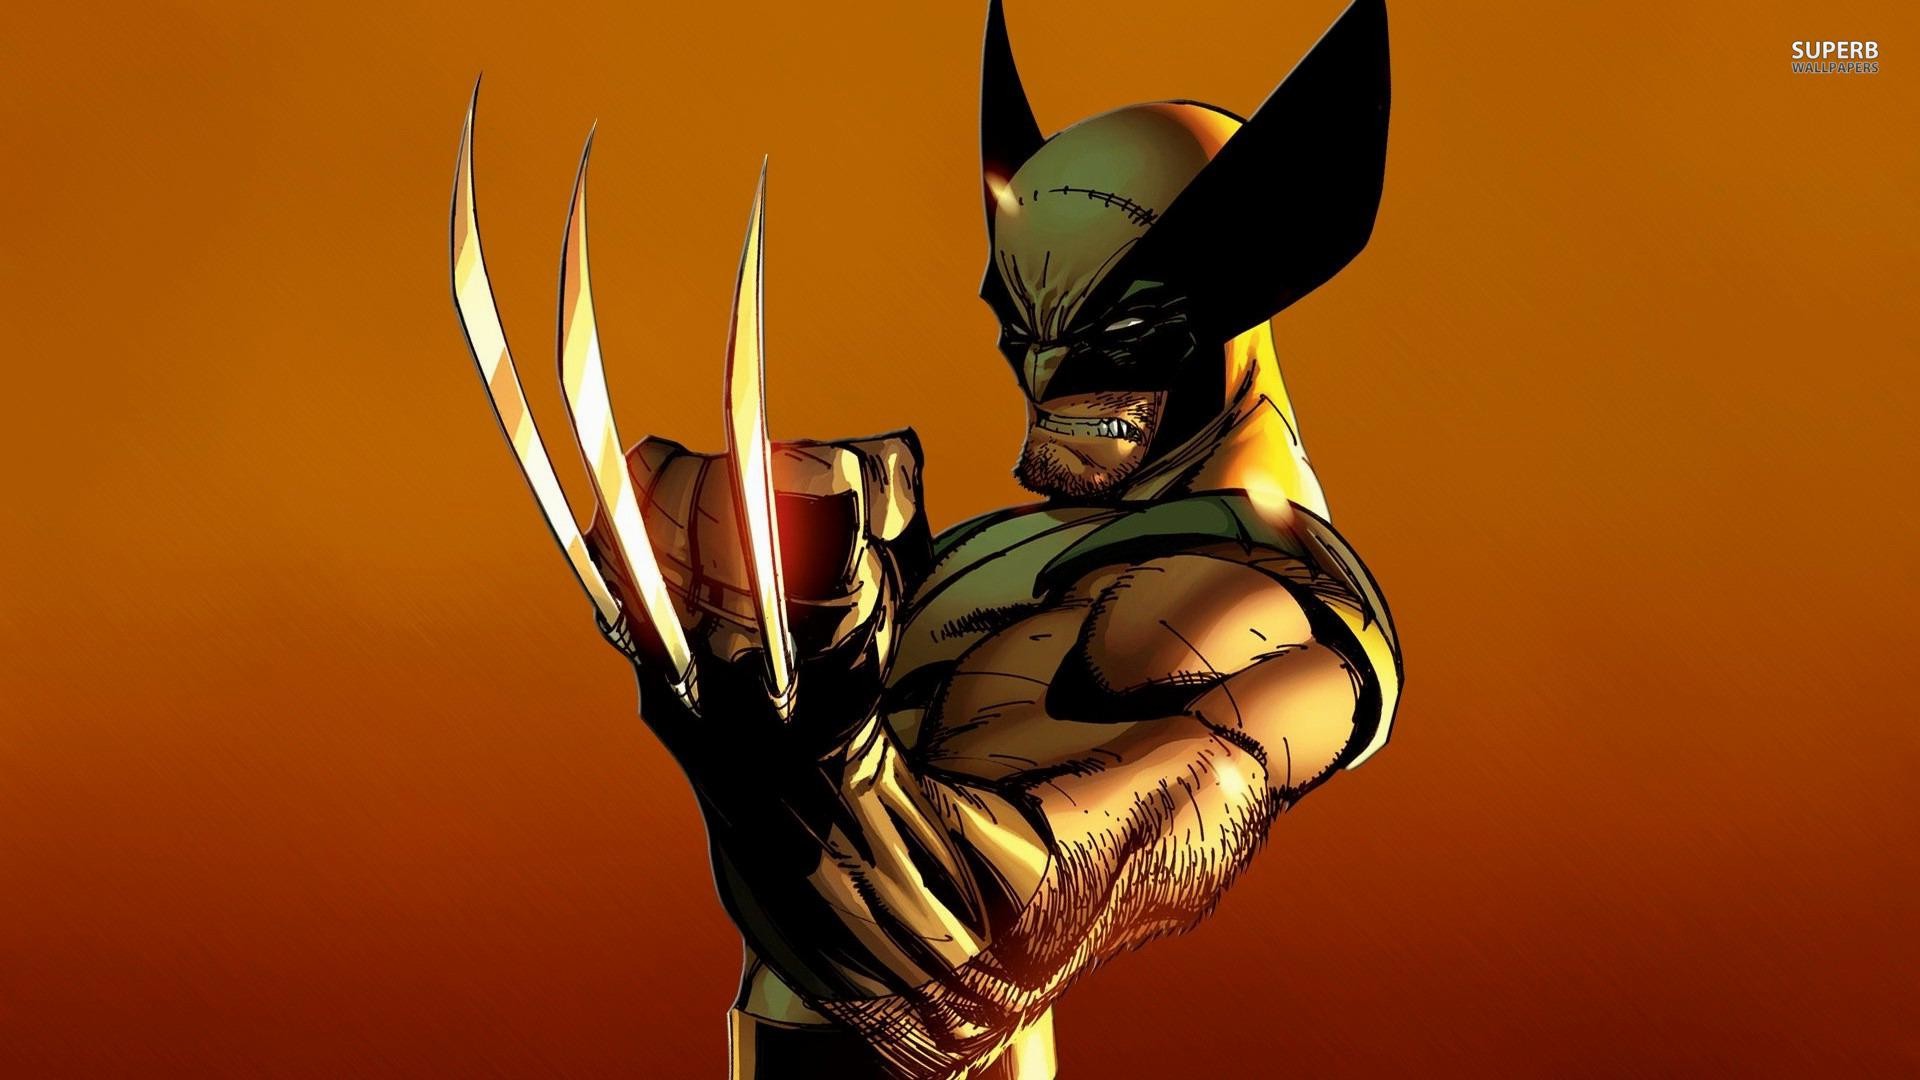 1920x1080 The Wolverine Movie Wallpapers HD Wallpapers Wolverine Pics Wallpapers  Wallpapers)